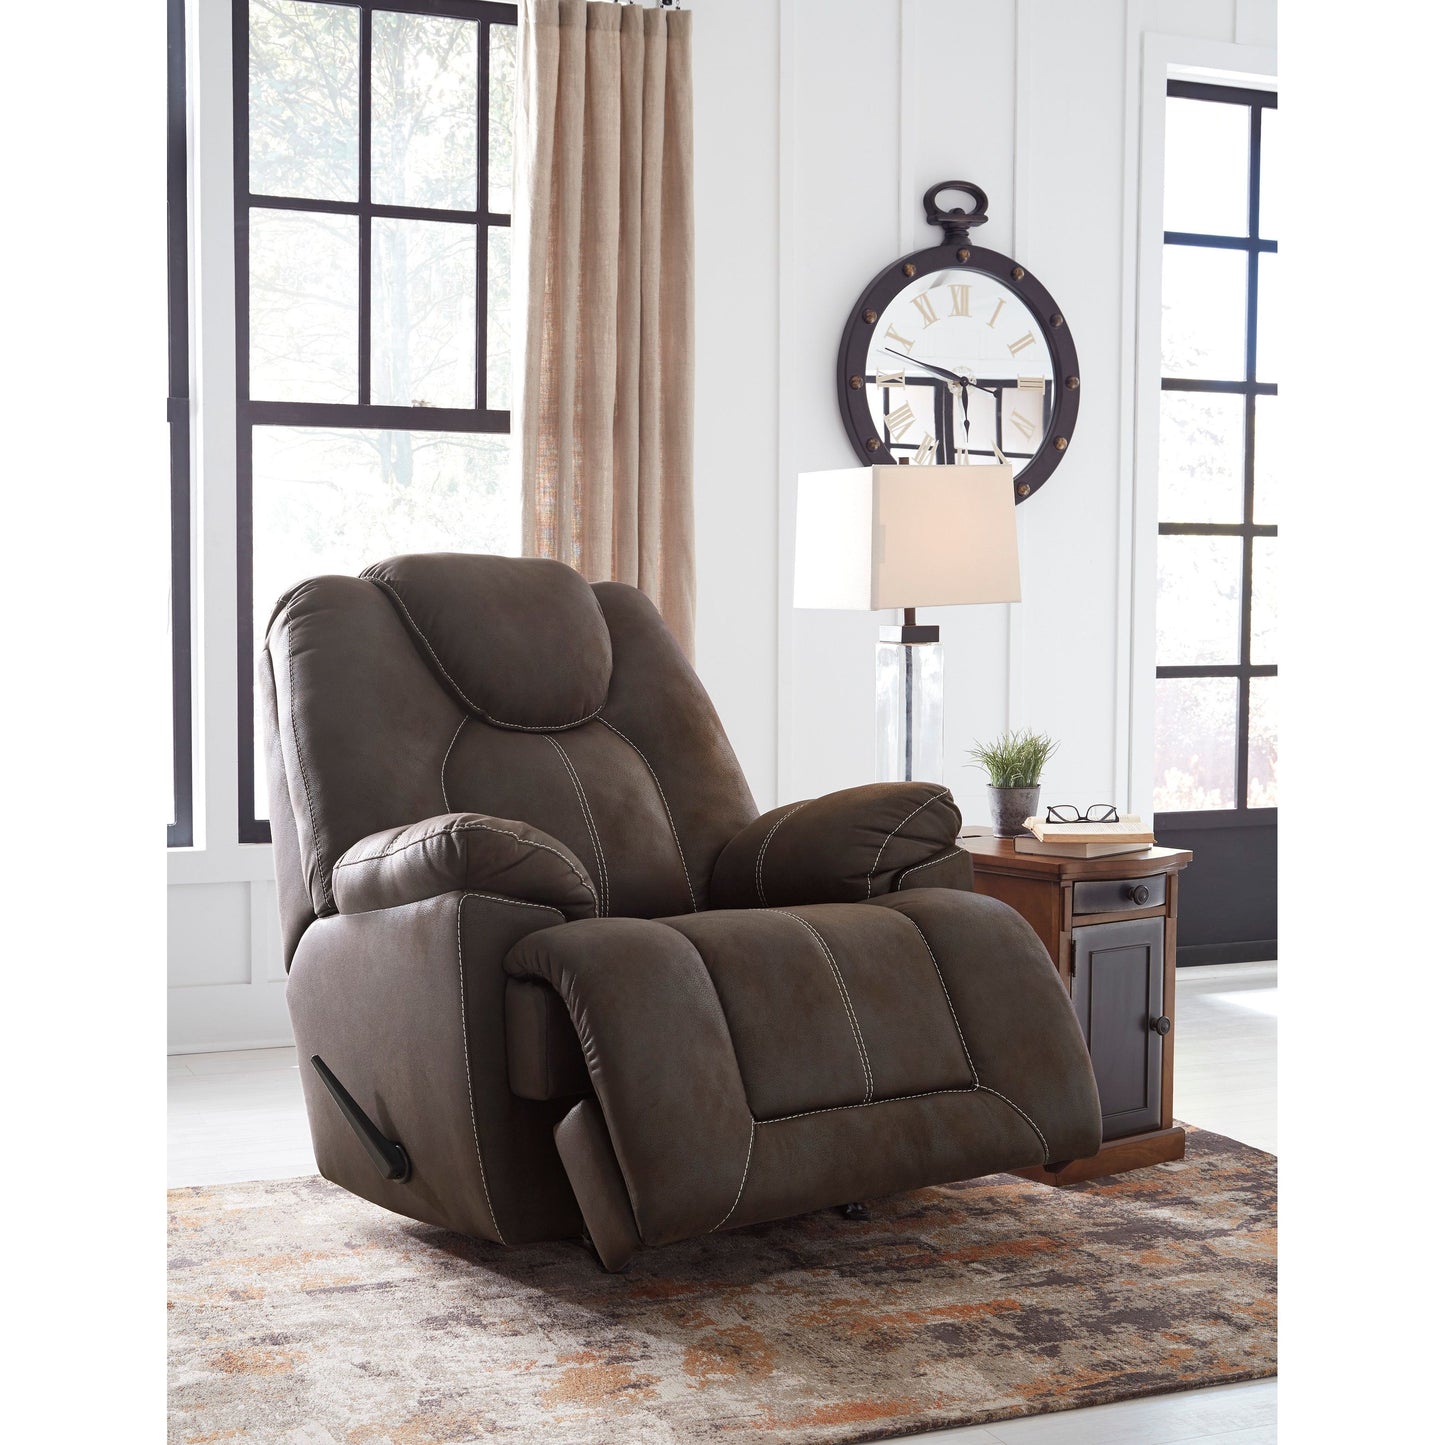 WARRIOR FORTRESS RECLINER - COFFEE